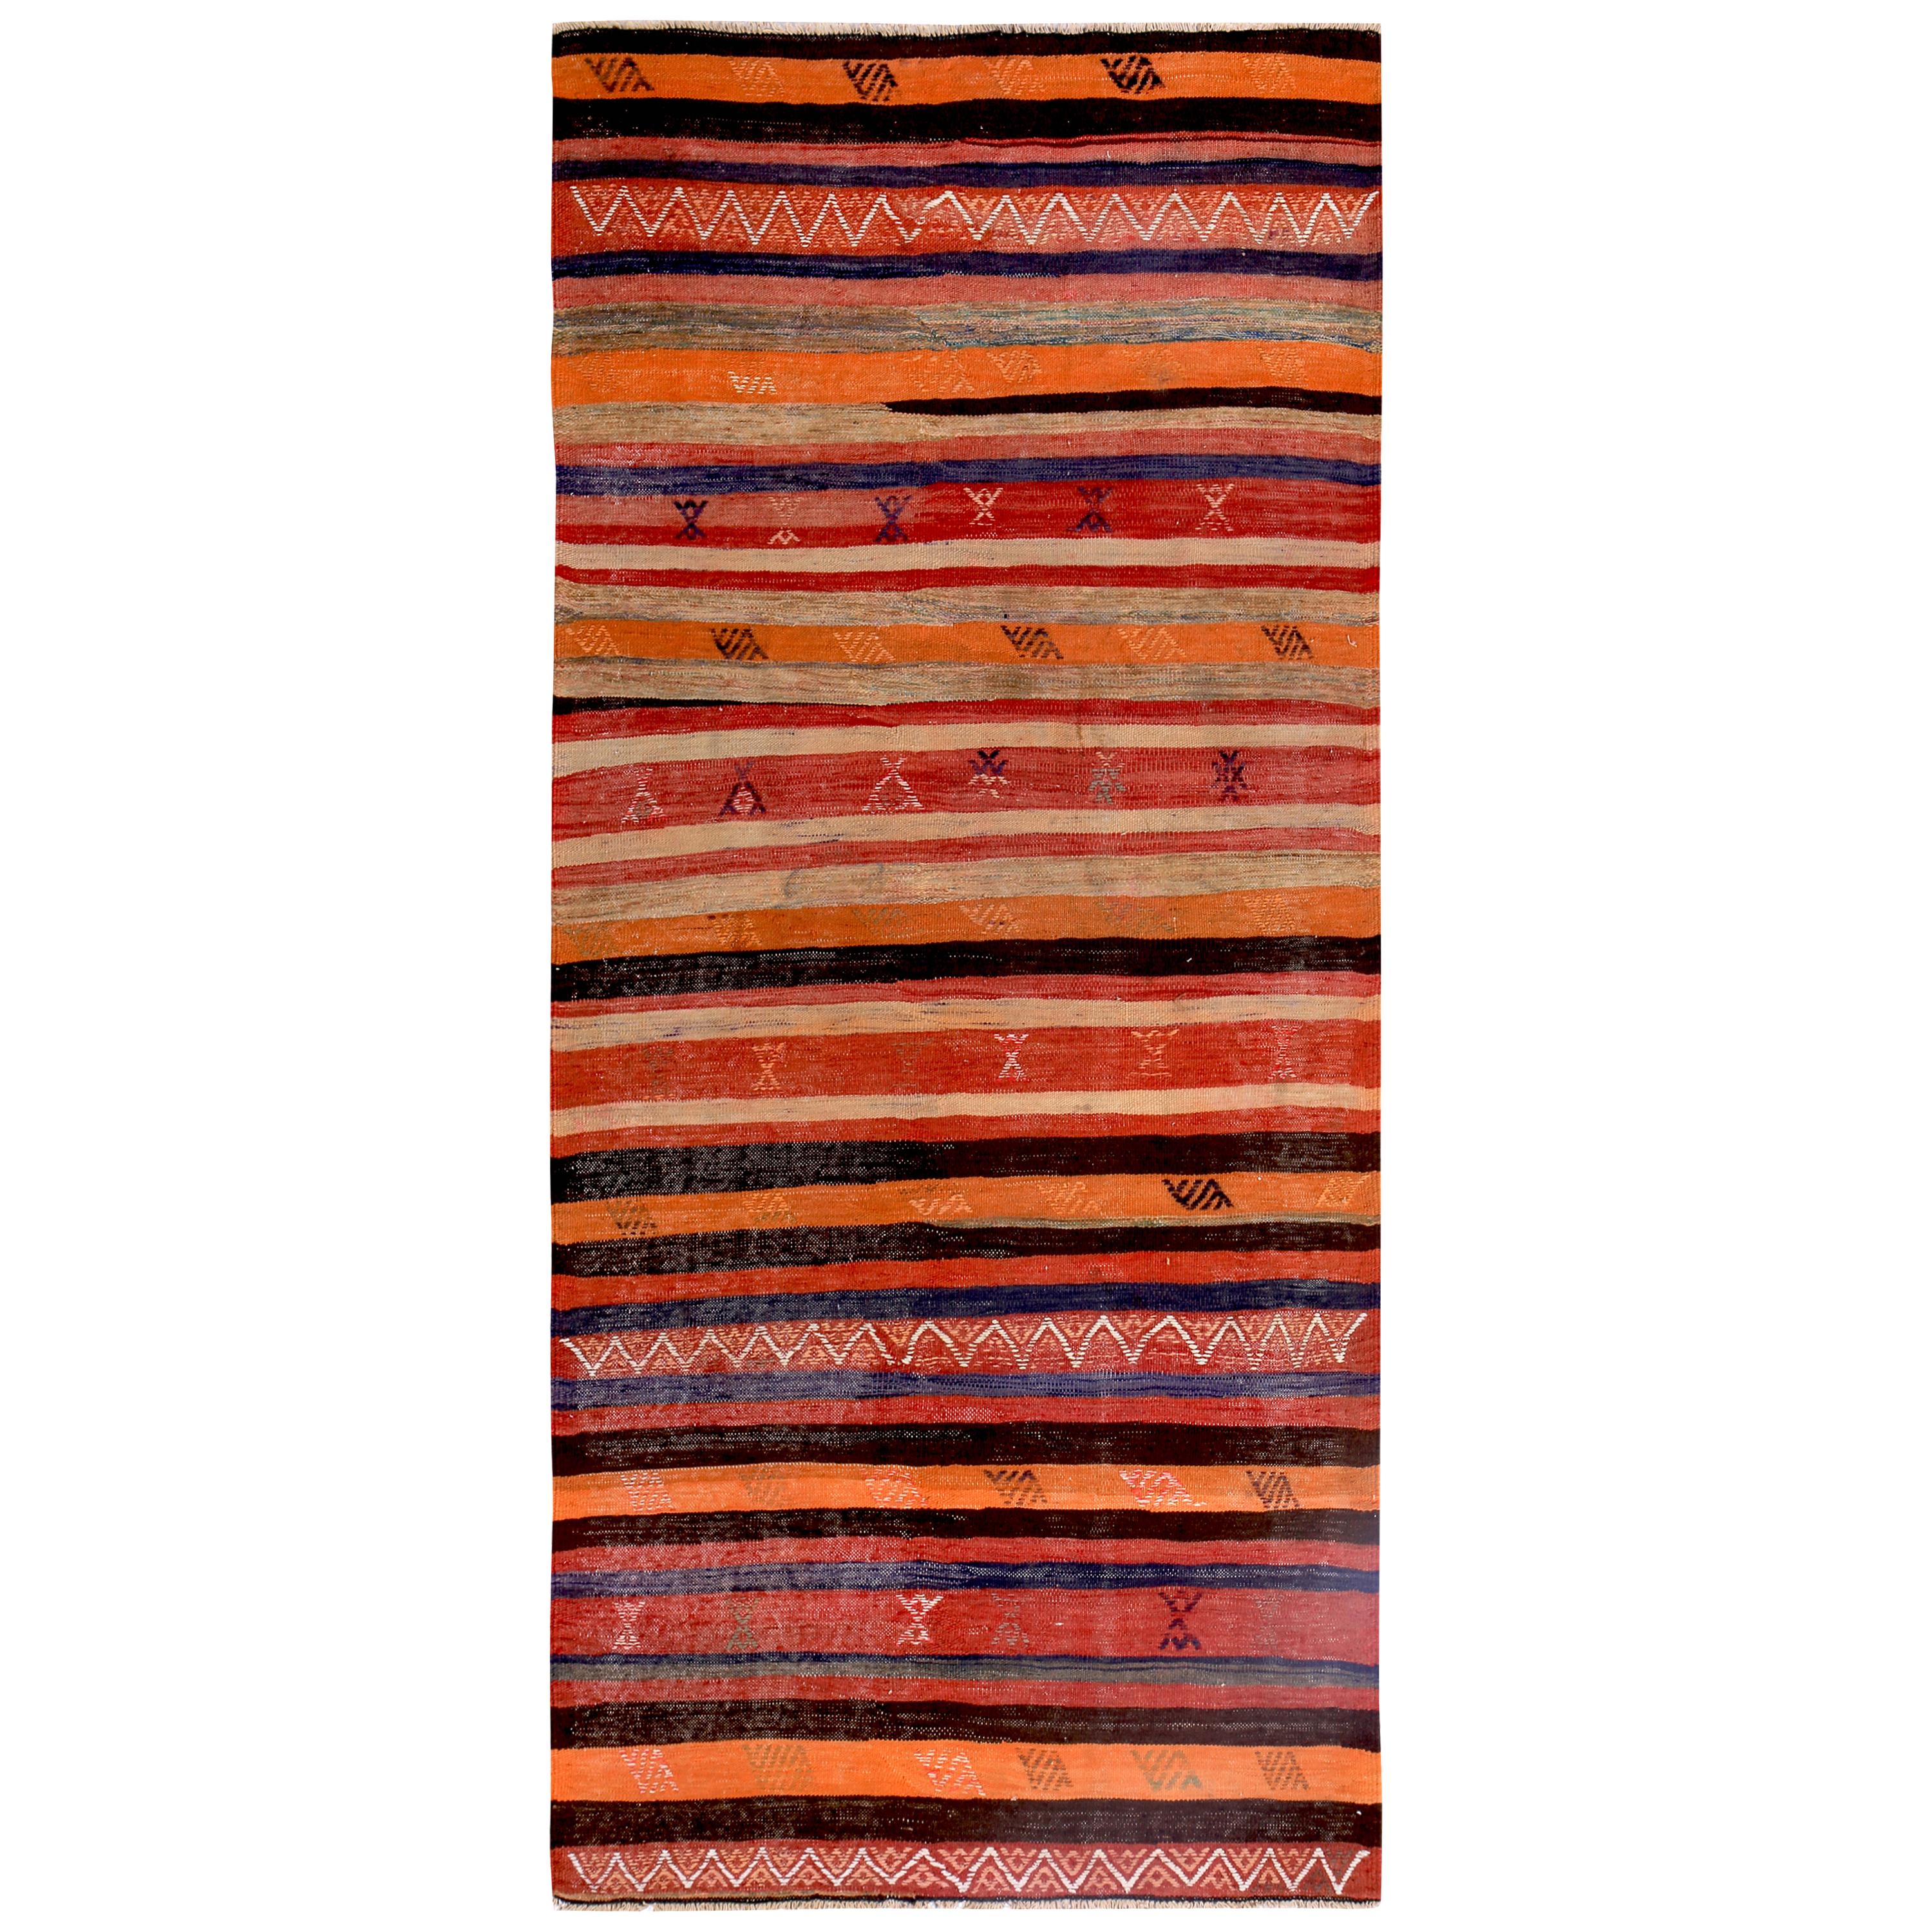 Turkish Kilim Runner Rug with Red and Orange Stripes and Tribal Patterns For Sale